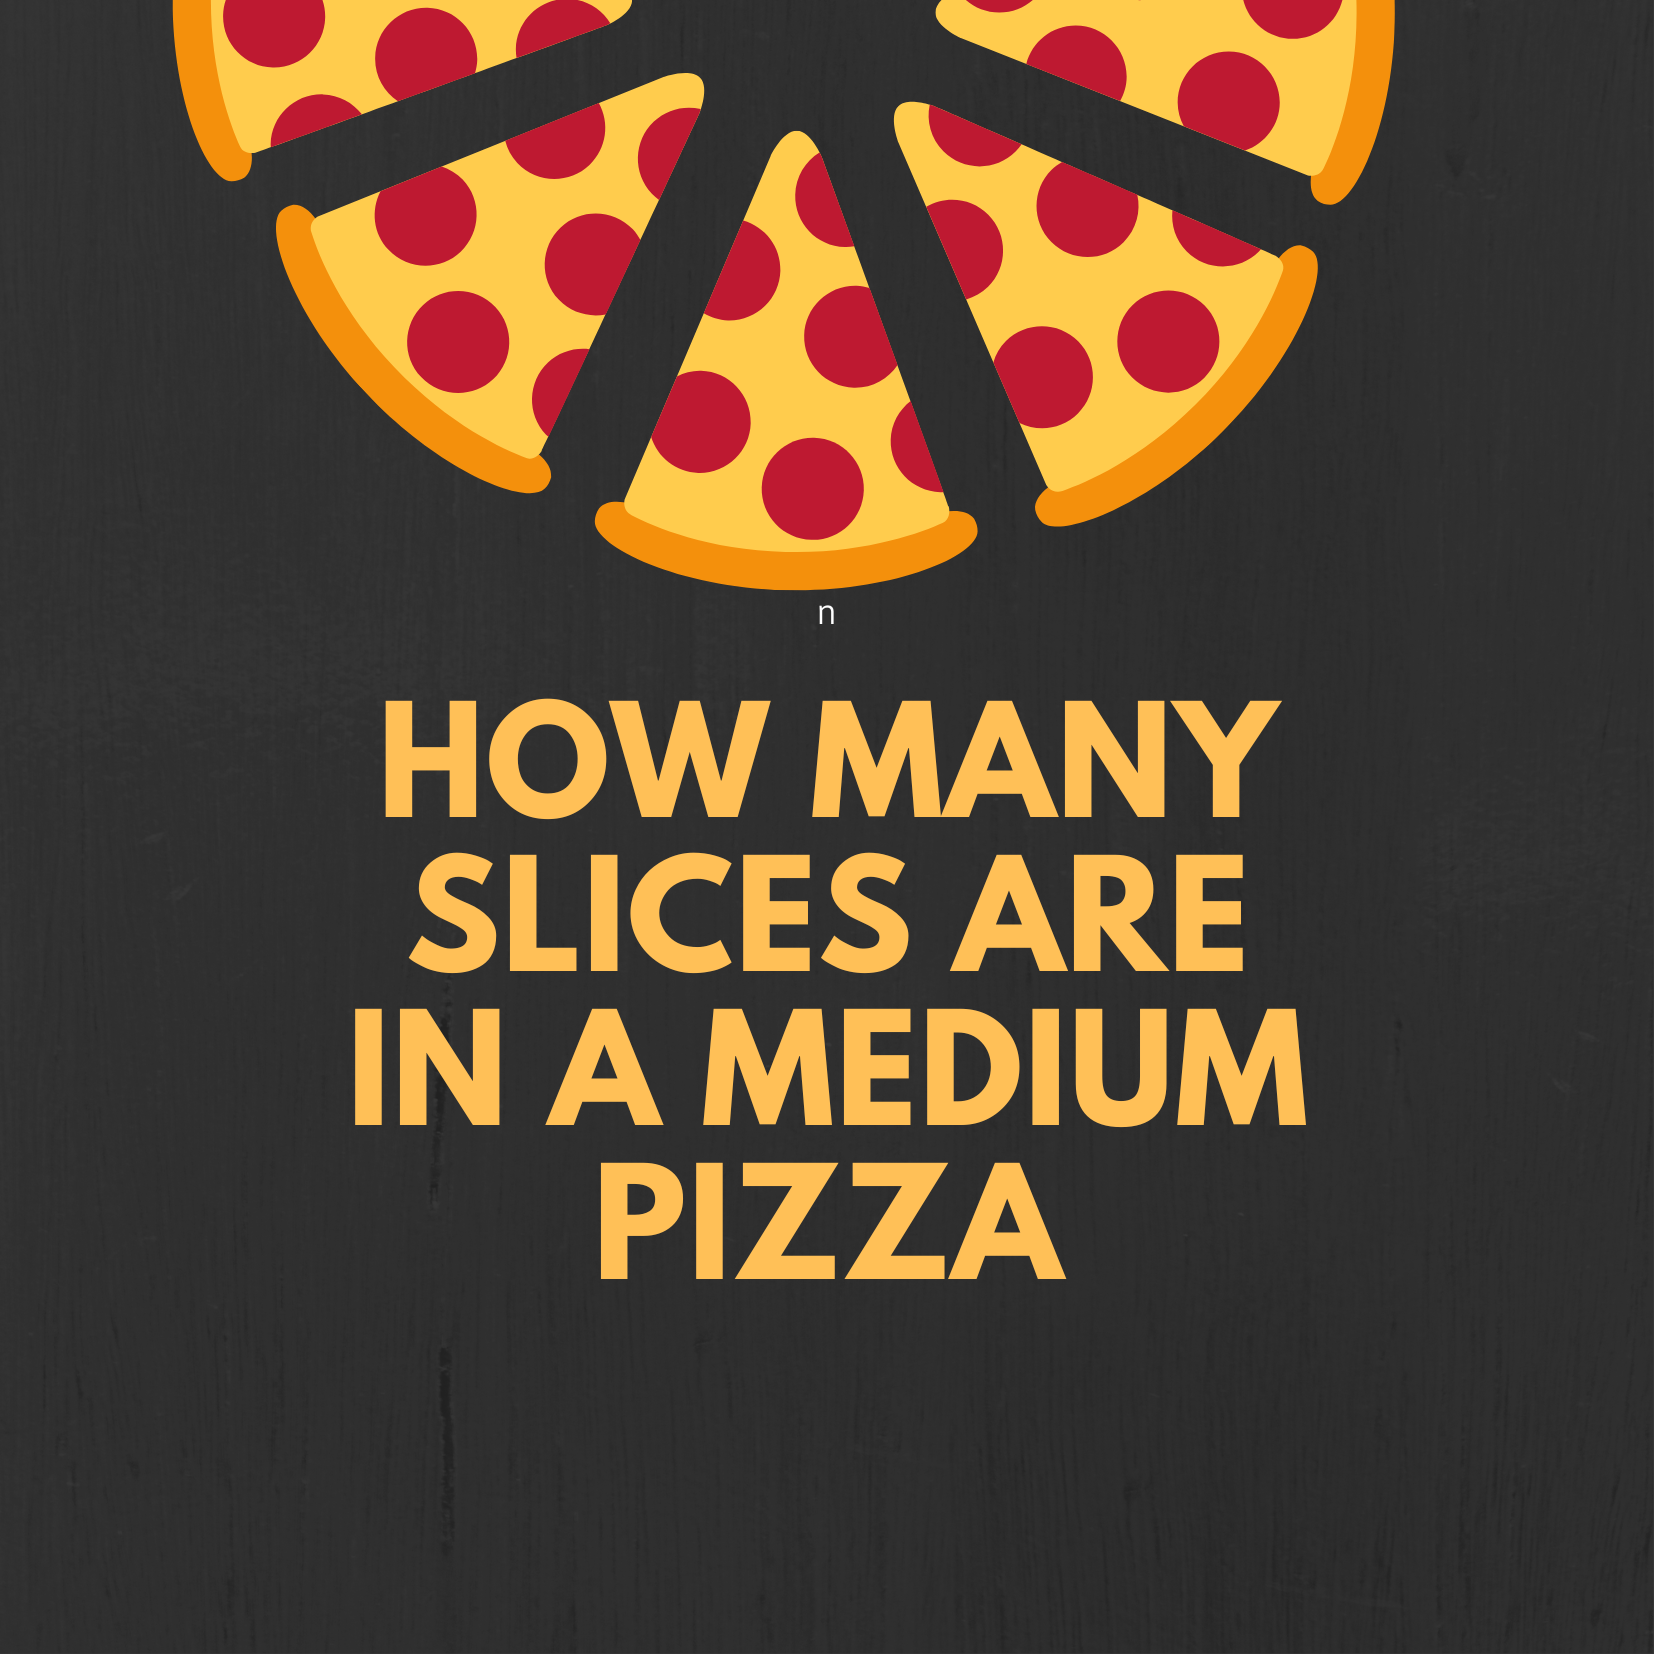 How Many Slices in a Medium Pizza?